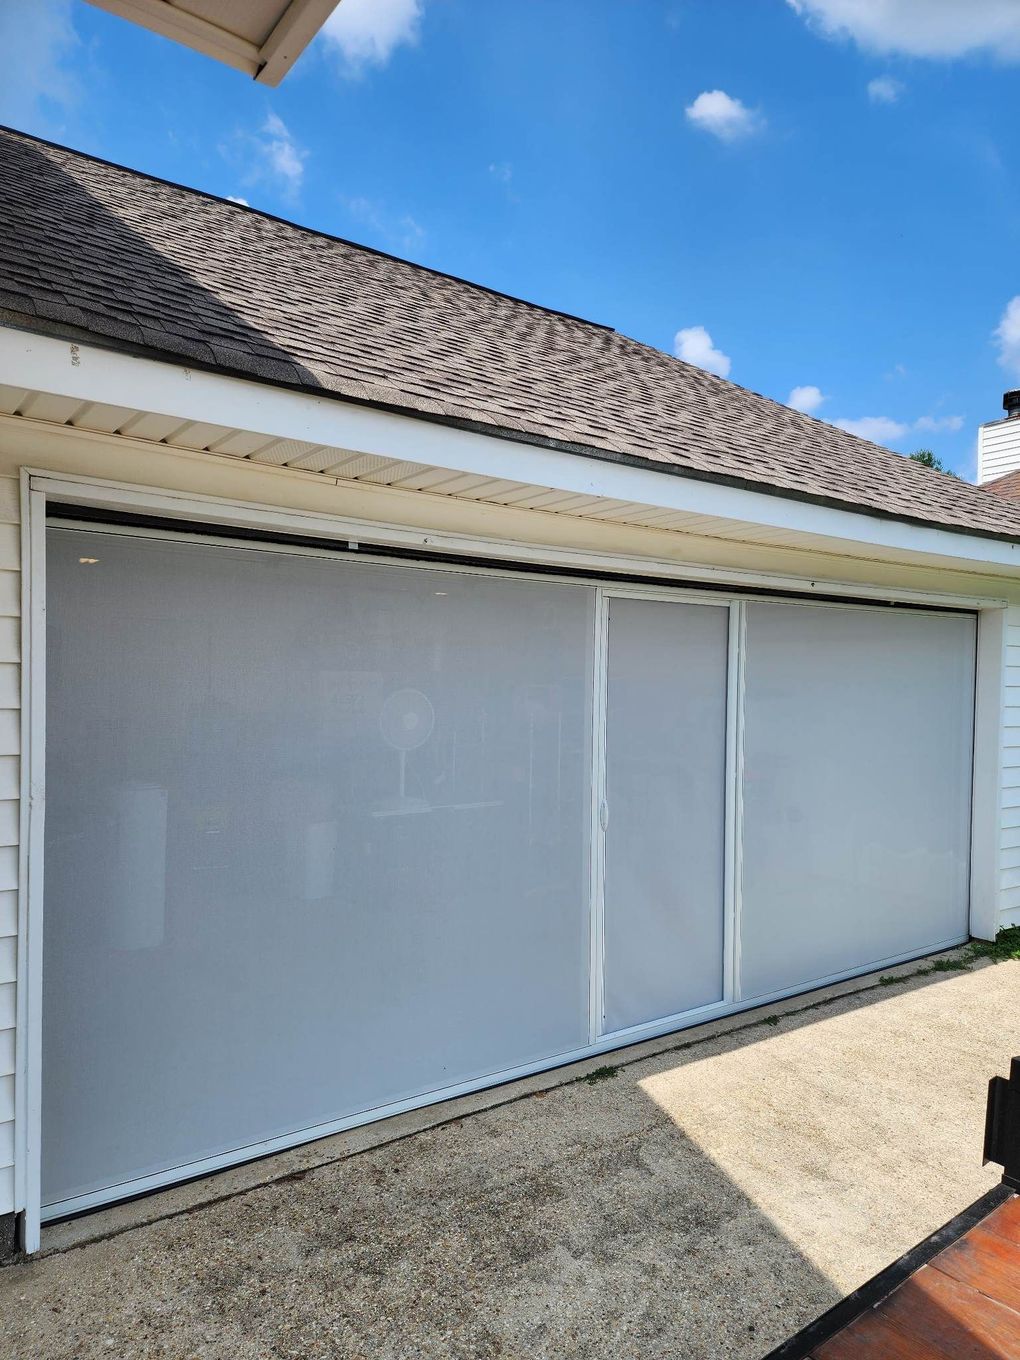 a garage door with a screen on it and a blue sky in the background .